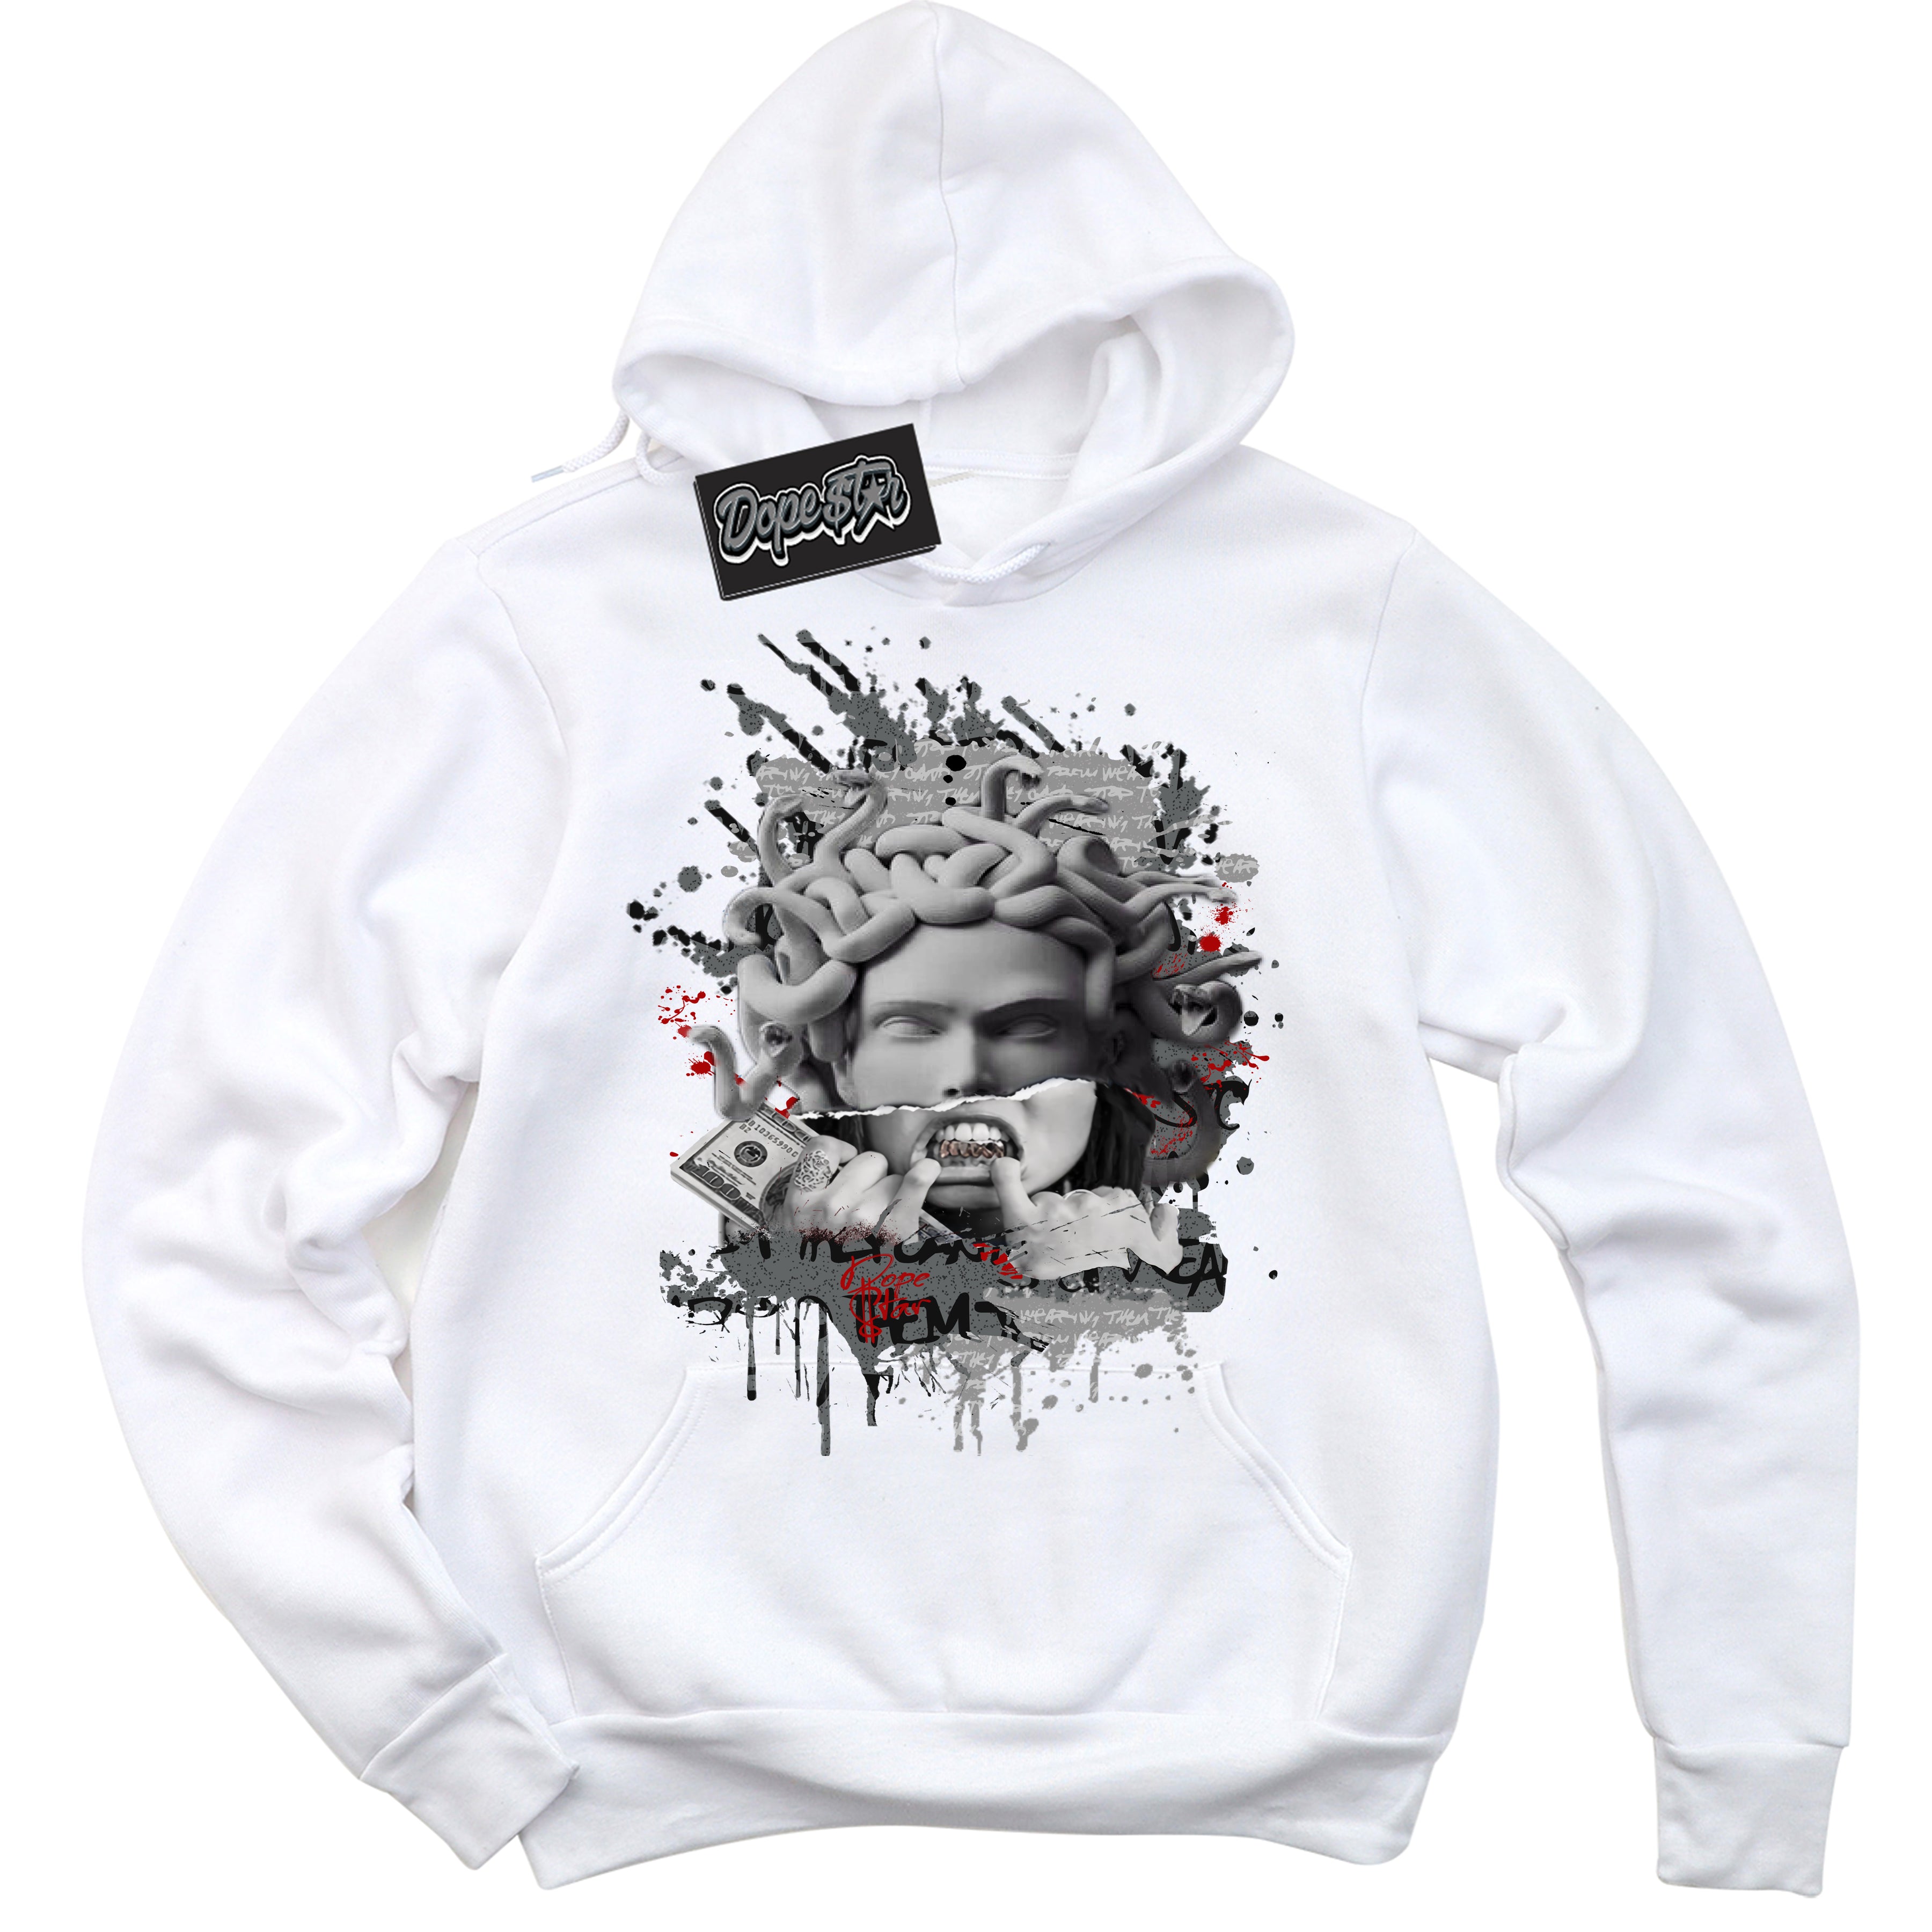 Cool White Hoodie with “ Medusa ”  design that Perfectly Matches Rebellionaire 1s Sneakers.